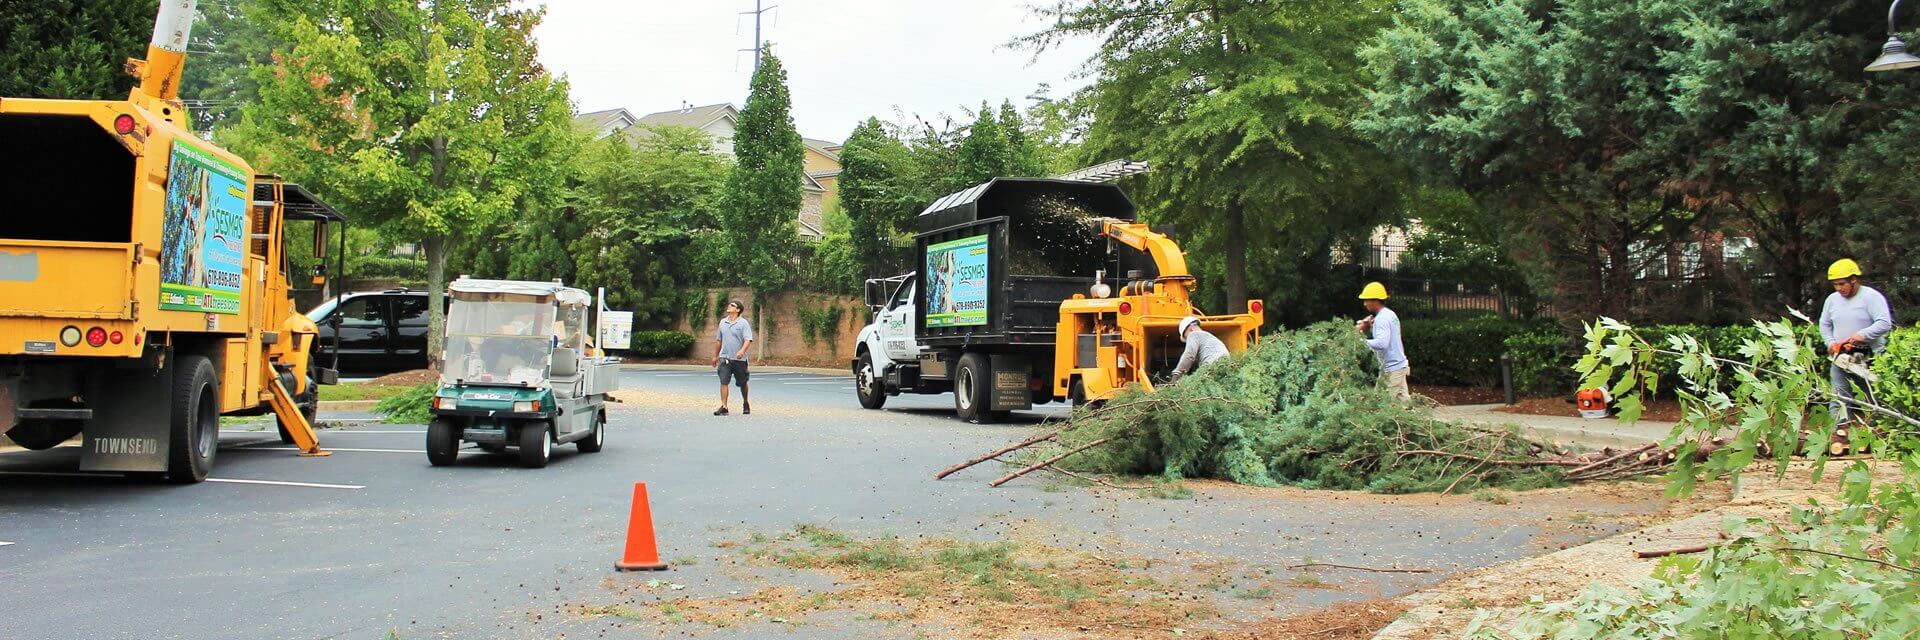 Commercial Tree Services-West Palm Beach Tree Trimming and Tree Removal Services-We Offer Tree Trimming Services, Tree Removal, Tree Pruning, Tree Cutting, Residential and Commercial Tree Trimming Services, Storm Damage, Emergency Tree Removal, Land Clearing, Tree Companies, Tree Care Service, Stump Grinding, and we're the Best Tree Trimming Company Near You Guaranteed!